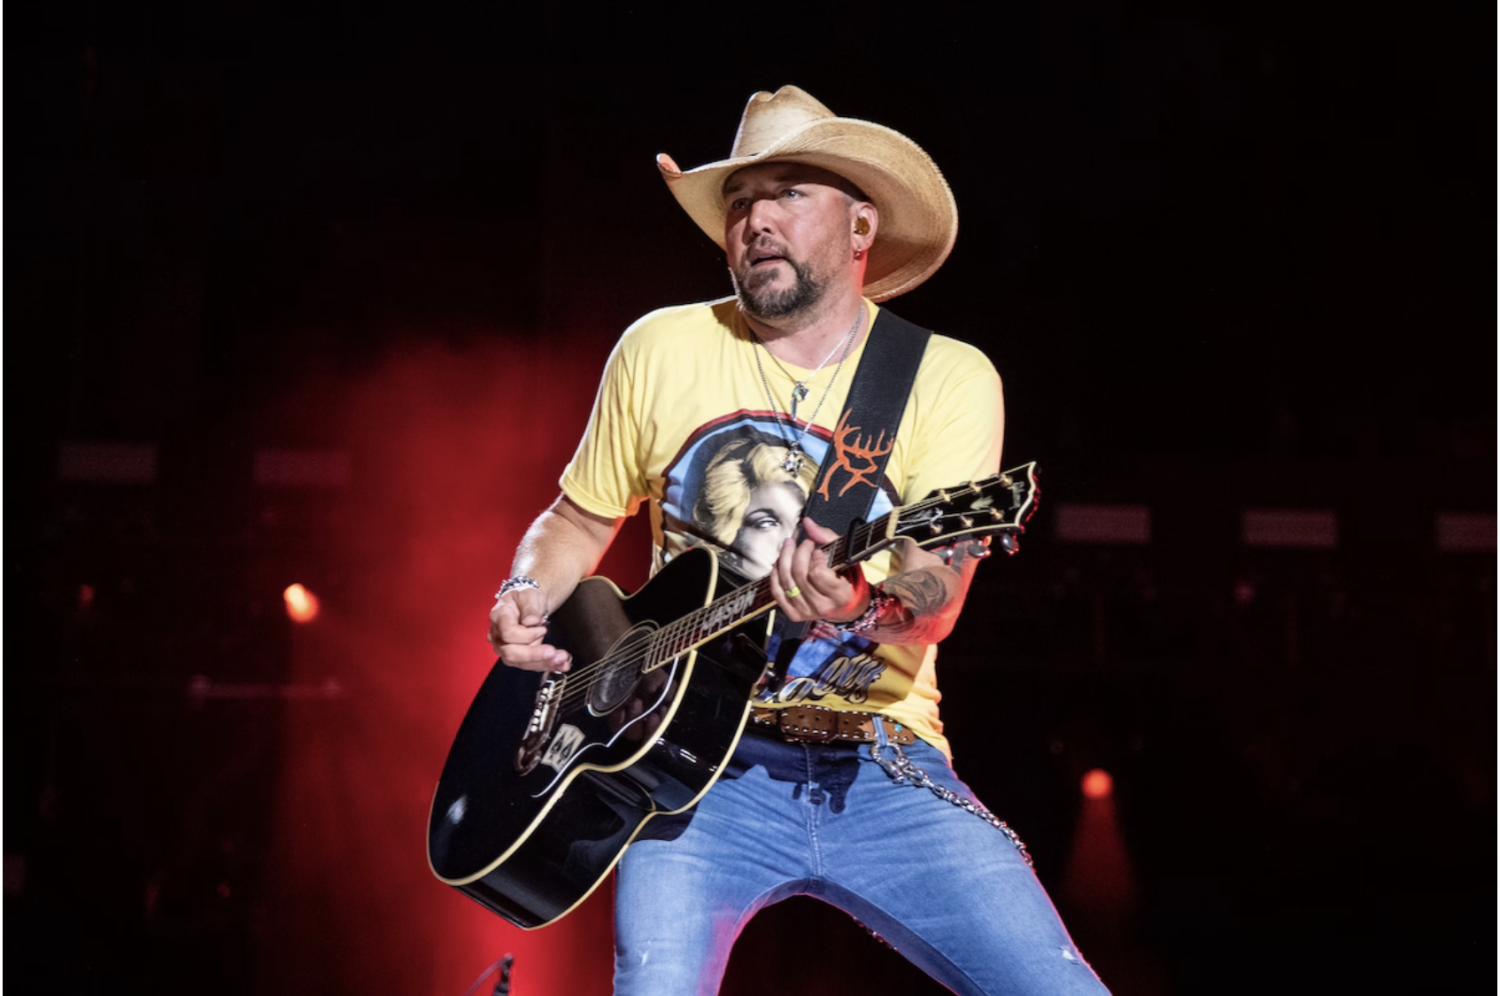 Black Lives Matter images deleted from Jason Aldean’s ‘Small Town’ video